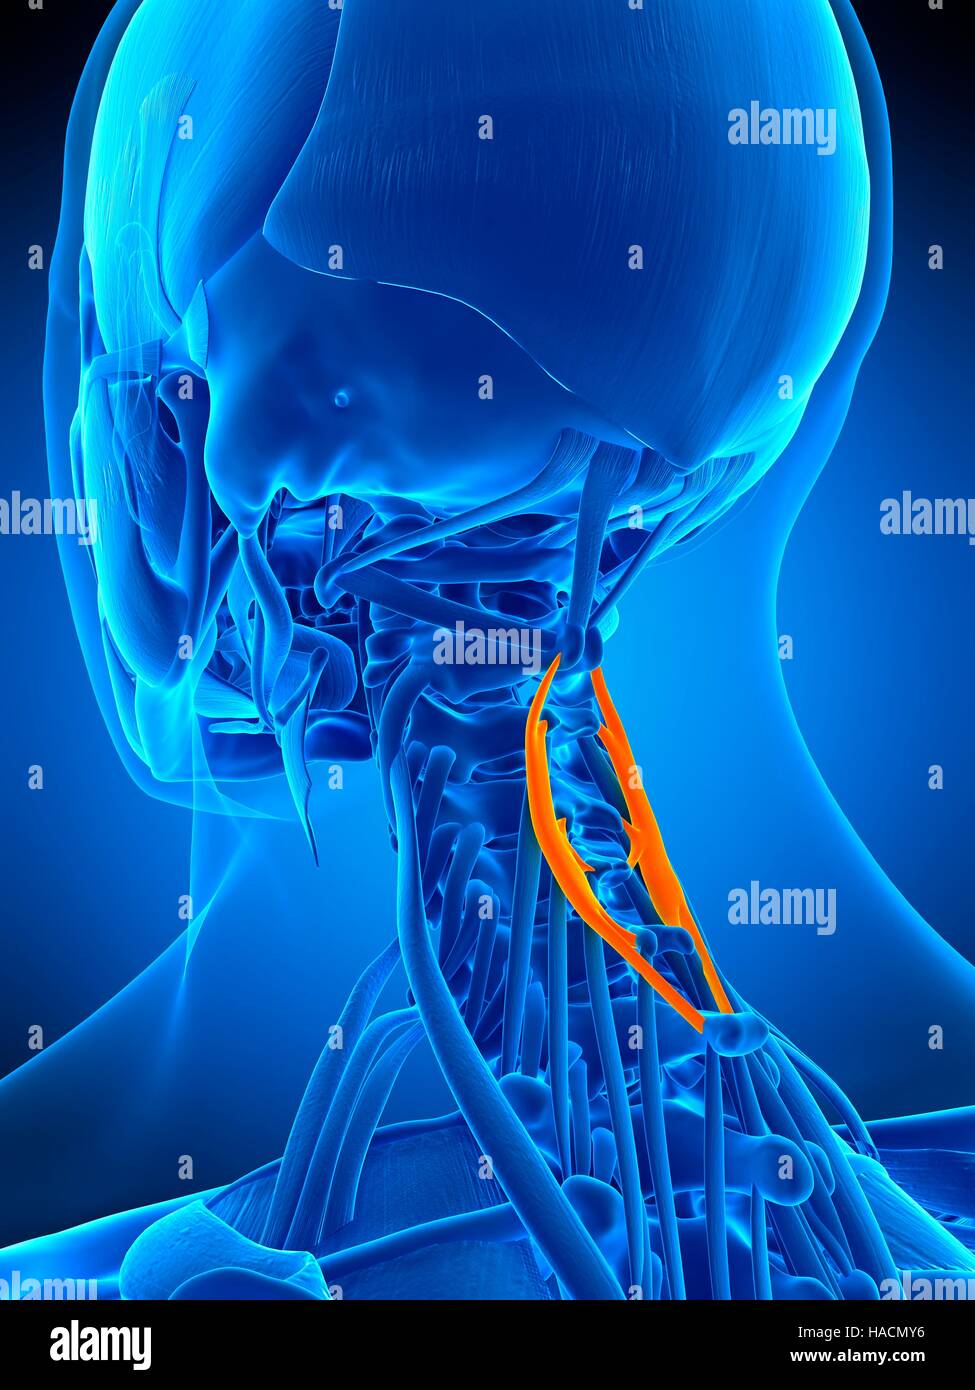 Illustration of the spinalis cervicis muscle. Stock Photo